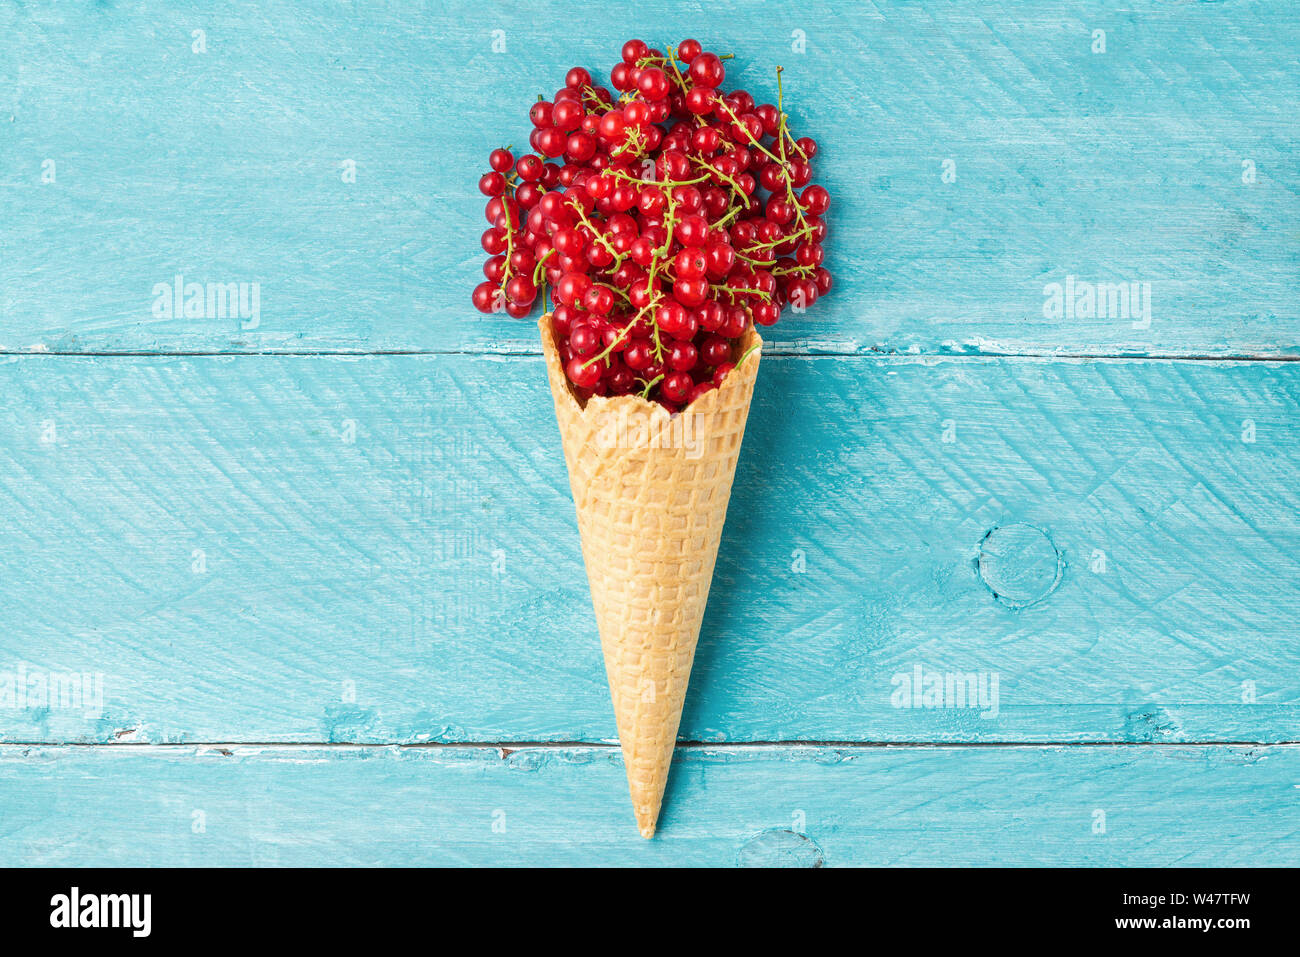 red currant berries in waffle ice cream cone on blue wooden background. creative summer food concept. flat lay. top view Stock Photo